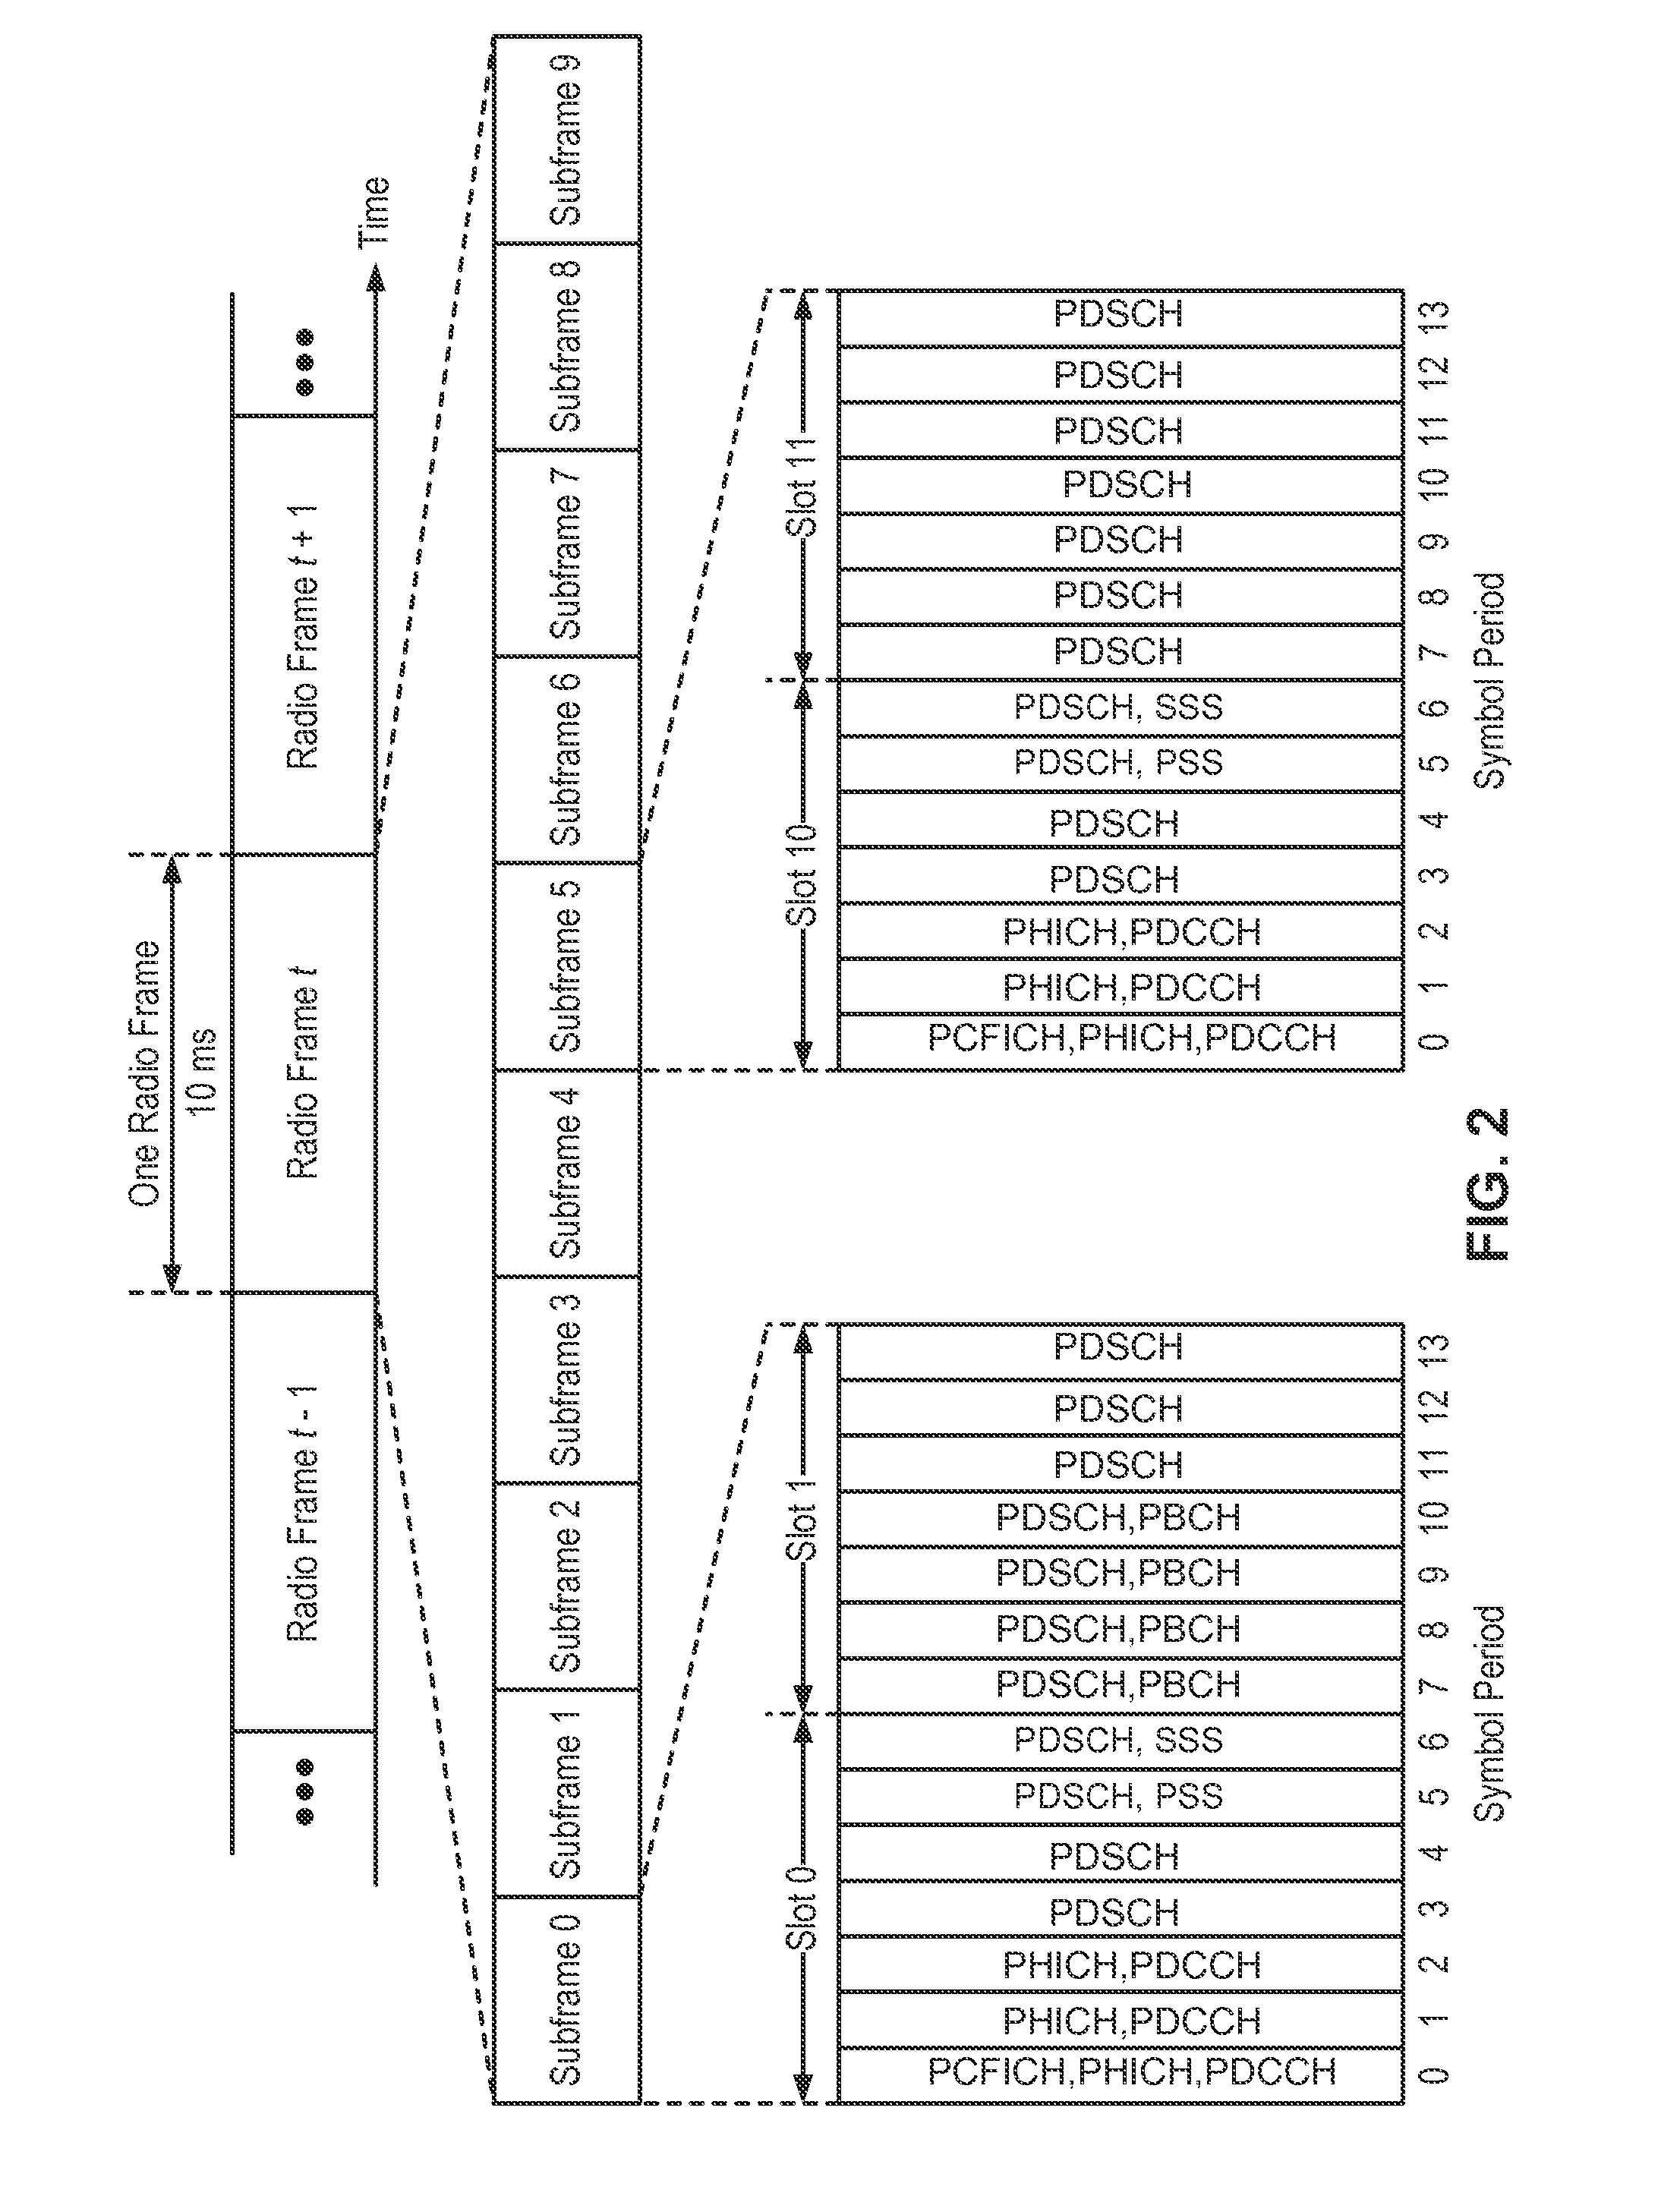 Interference classification-based carrier sense adaptive transmission (CSAT) in unlicensed spectrum